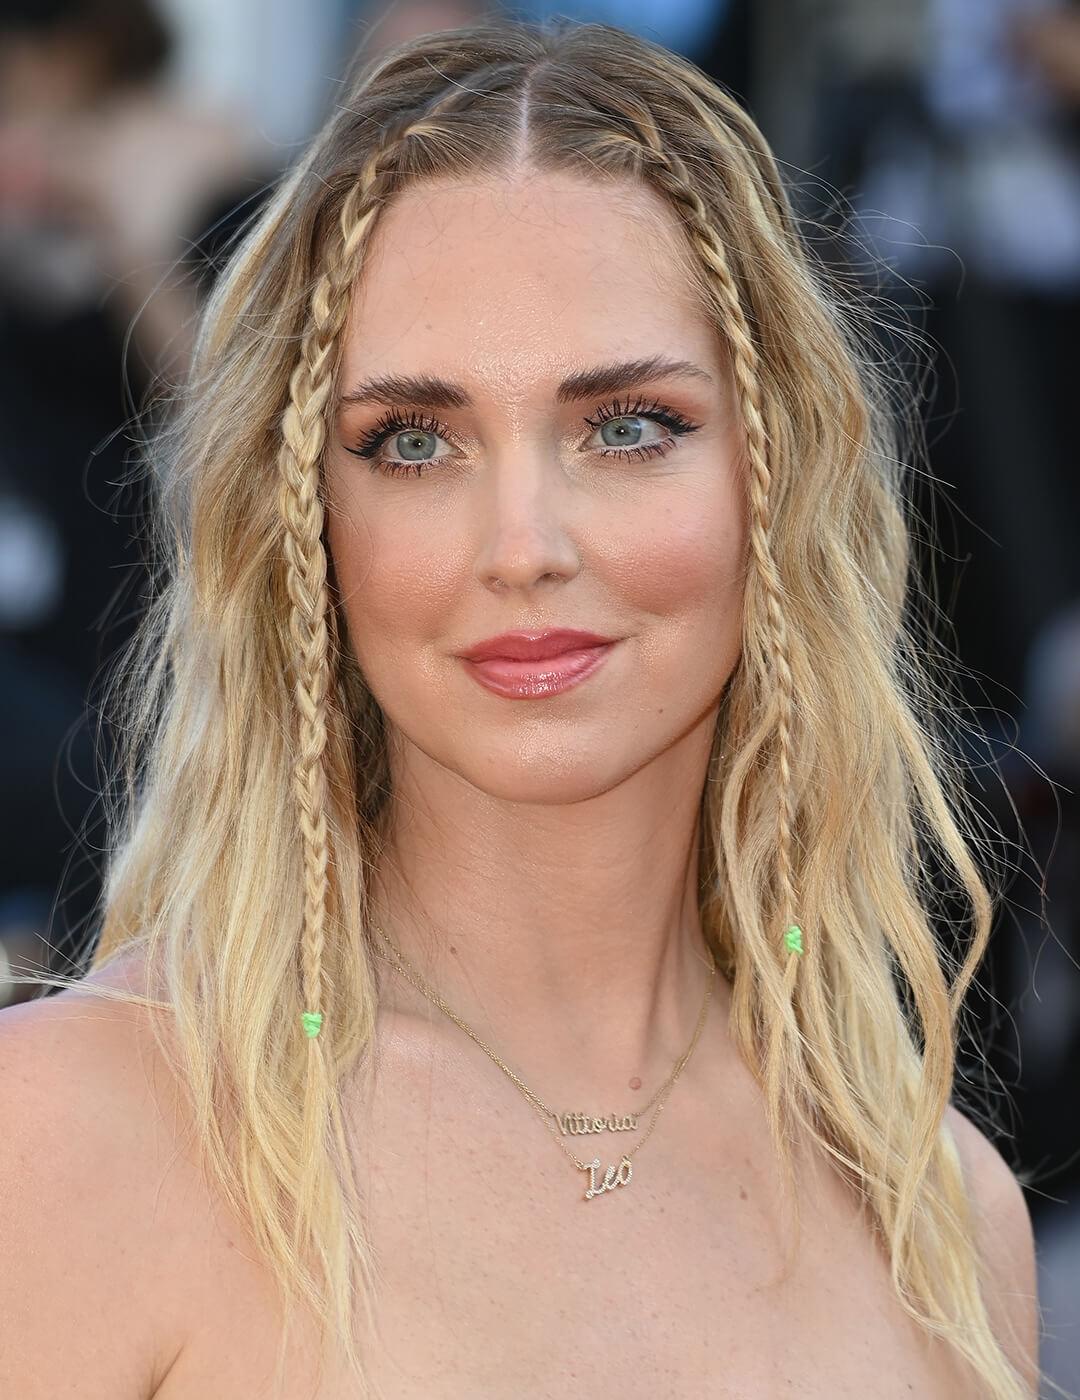 Chiara Ferragni rocking a wavy hairstyle with braided tendrils at the red carpet